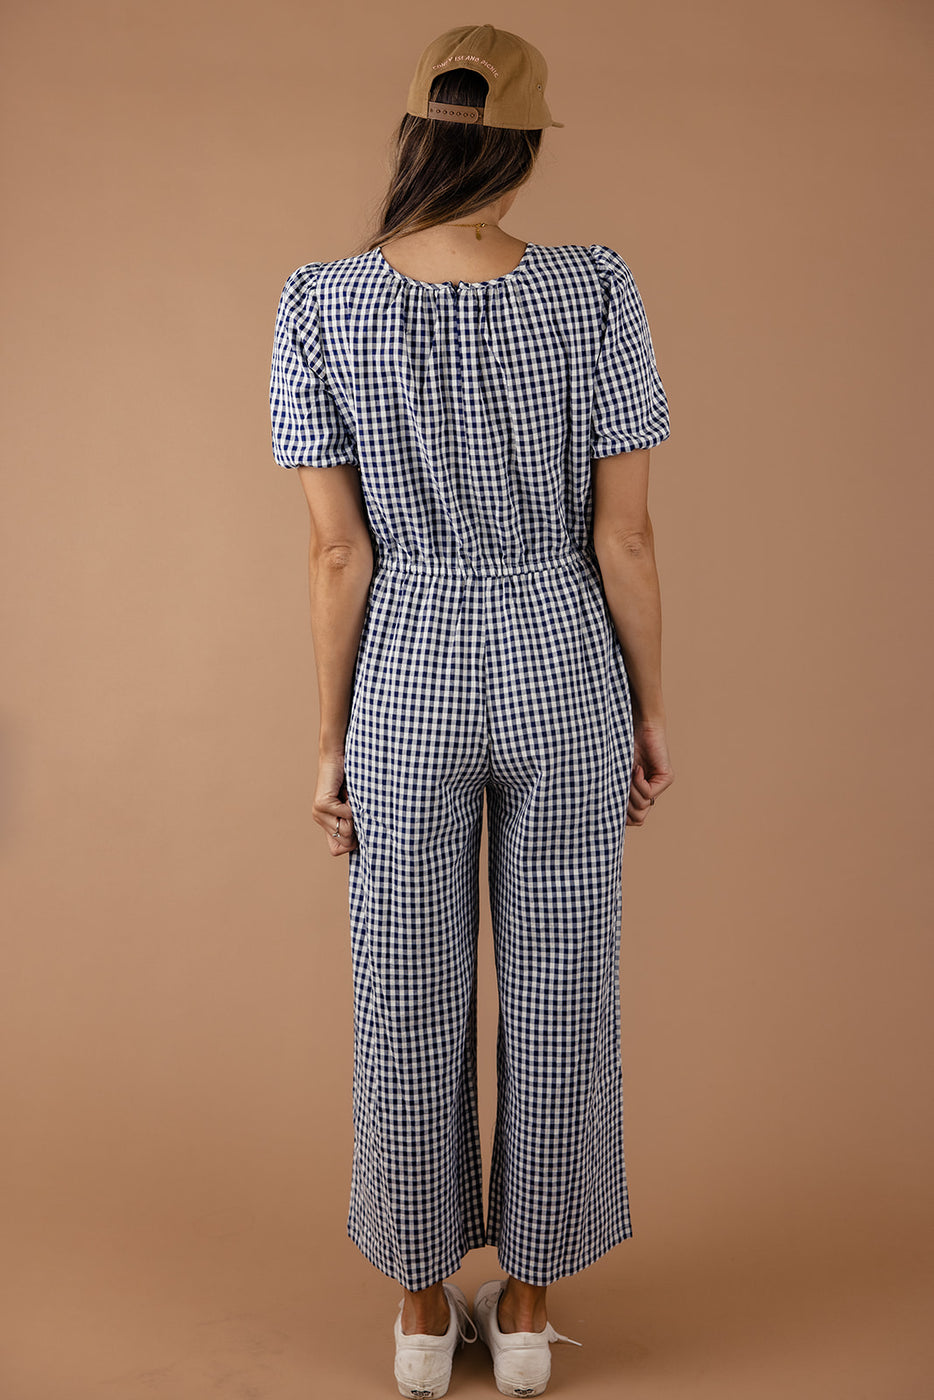 a woman in a blue and white checked jumpsuit